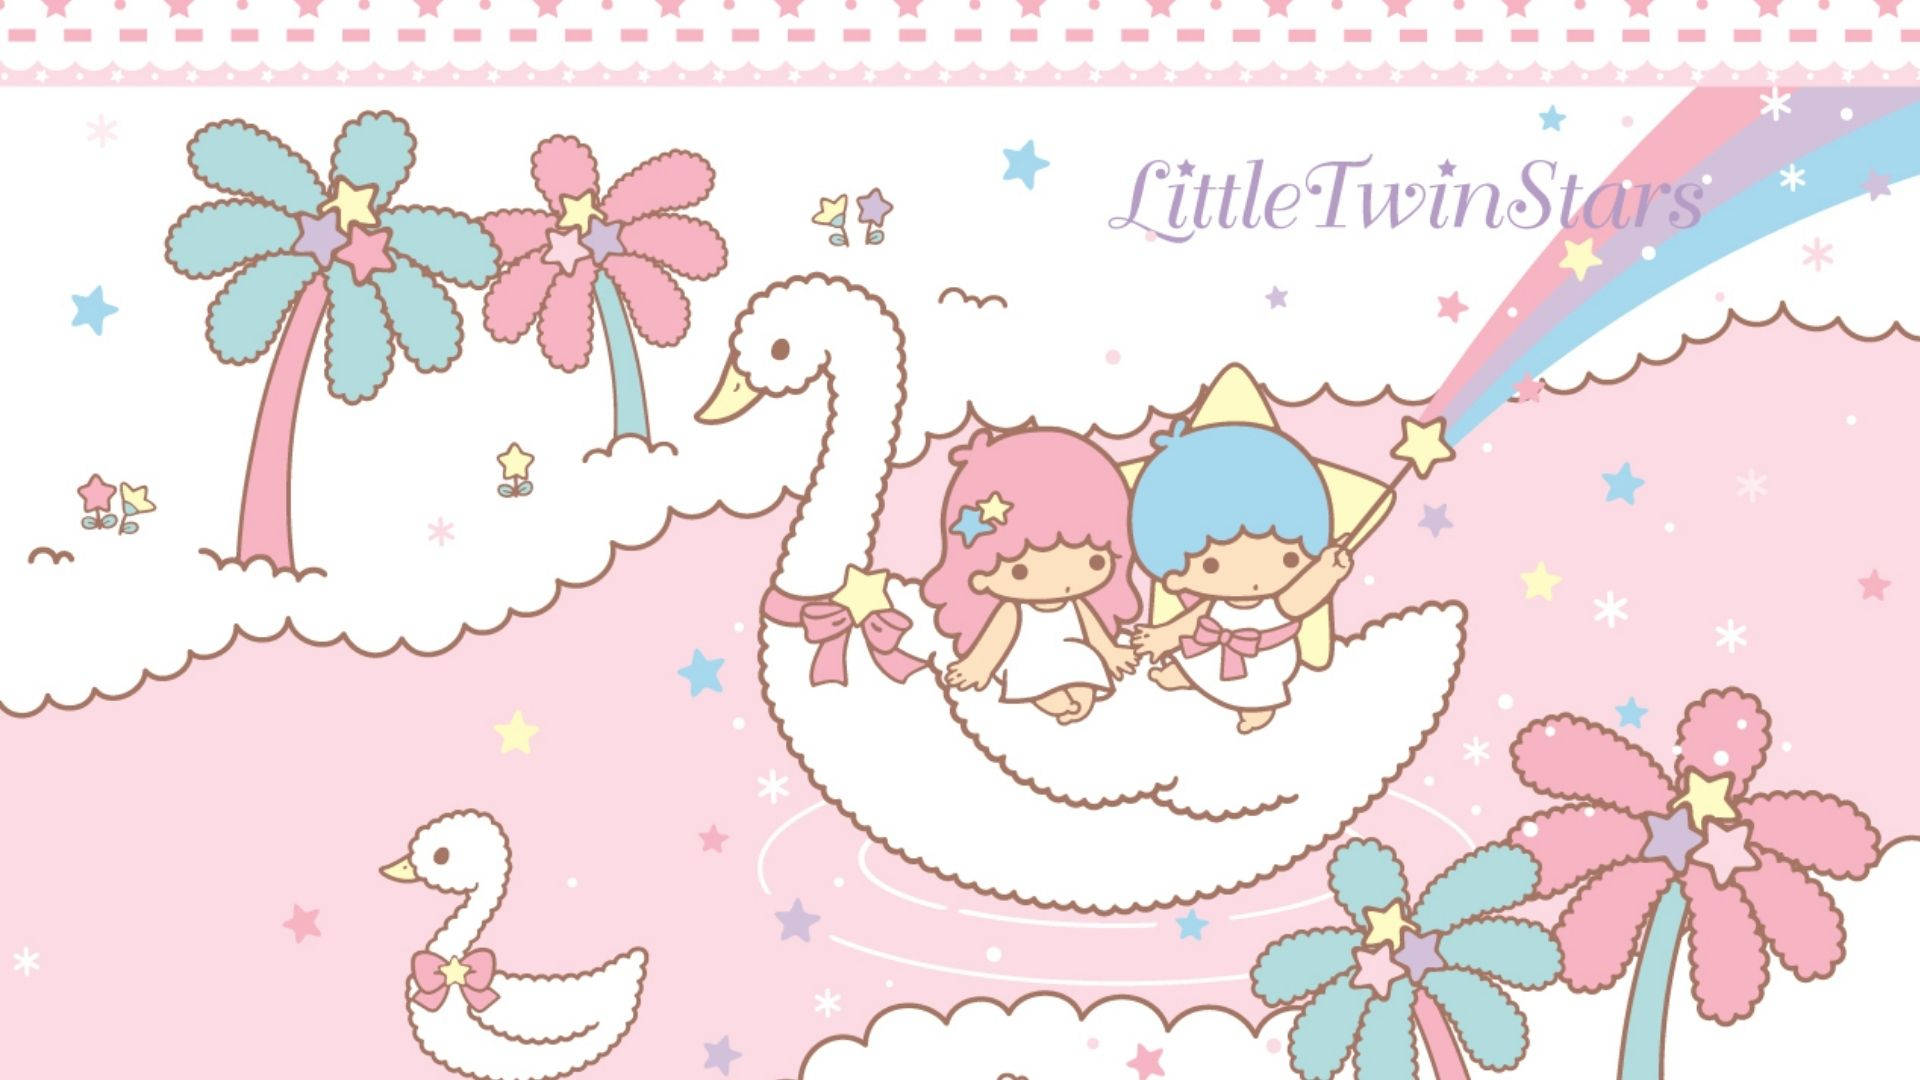 Free Cute Wallpaper Downloads, [2000+] Cute Wallpapers for FREE | Wallpapers .com